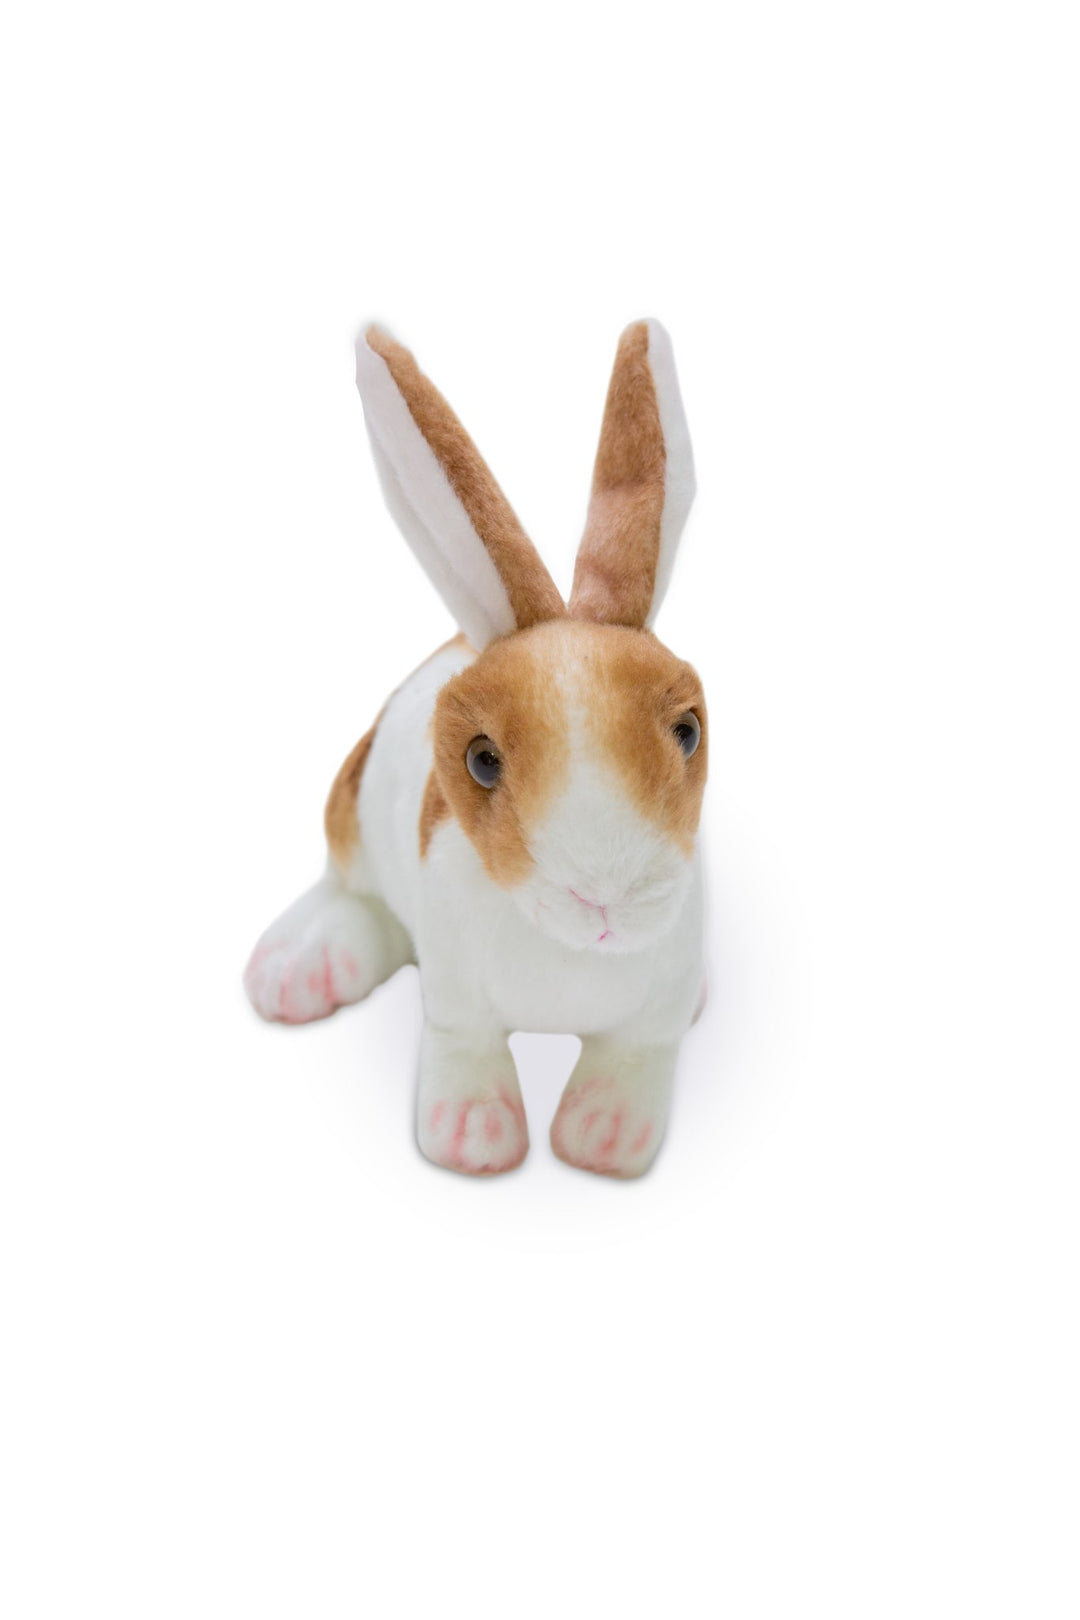 Our cute comfort toy rabbits are compliant with Australian Safety Standards AS/NZS ISO 8124 for age 0+